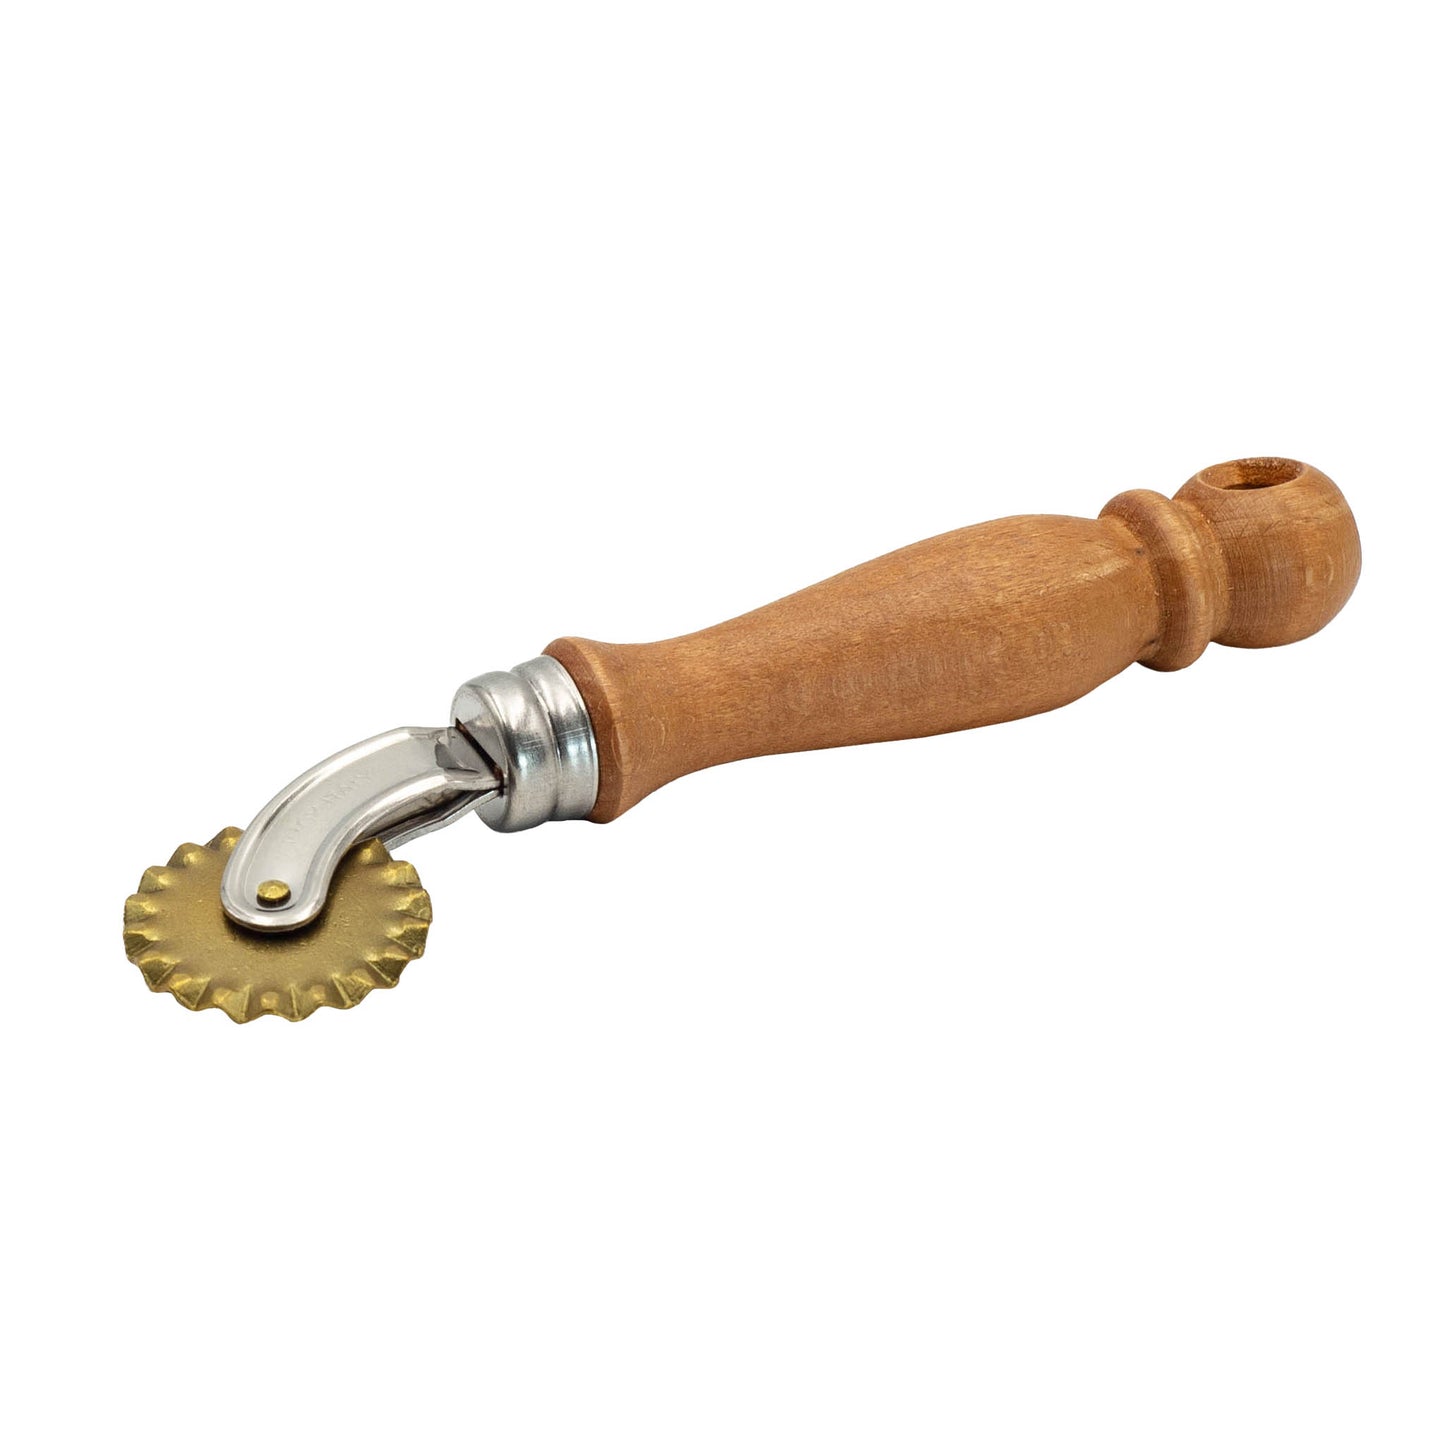 Hand held curved pastry and pasta wheel cutter with wooden handle. 